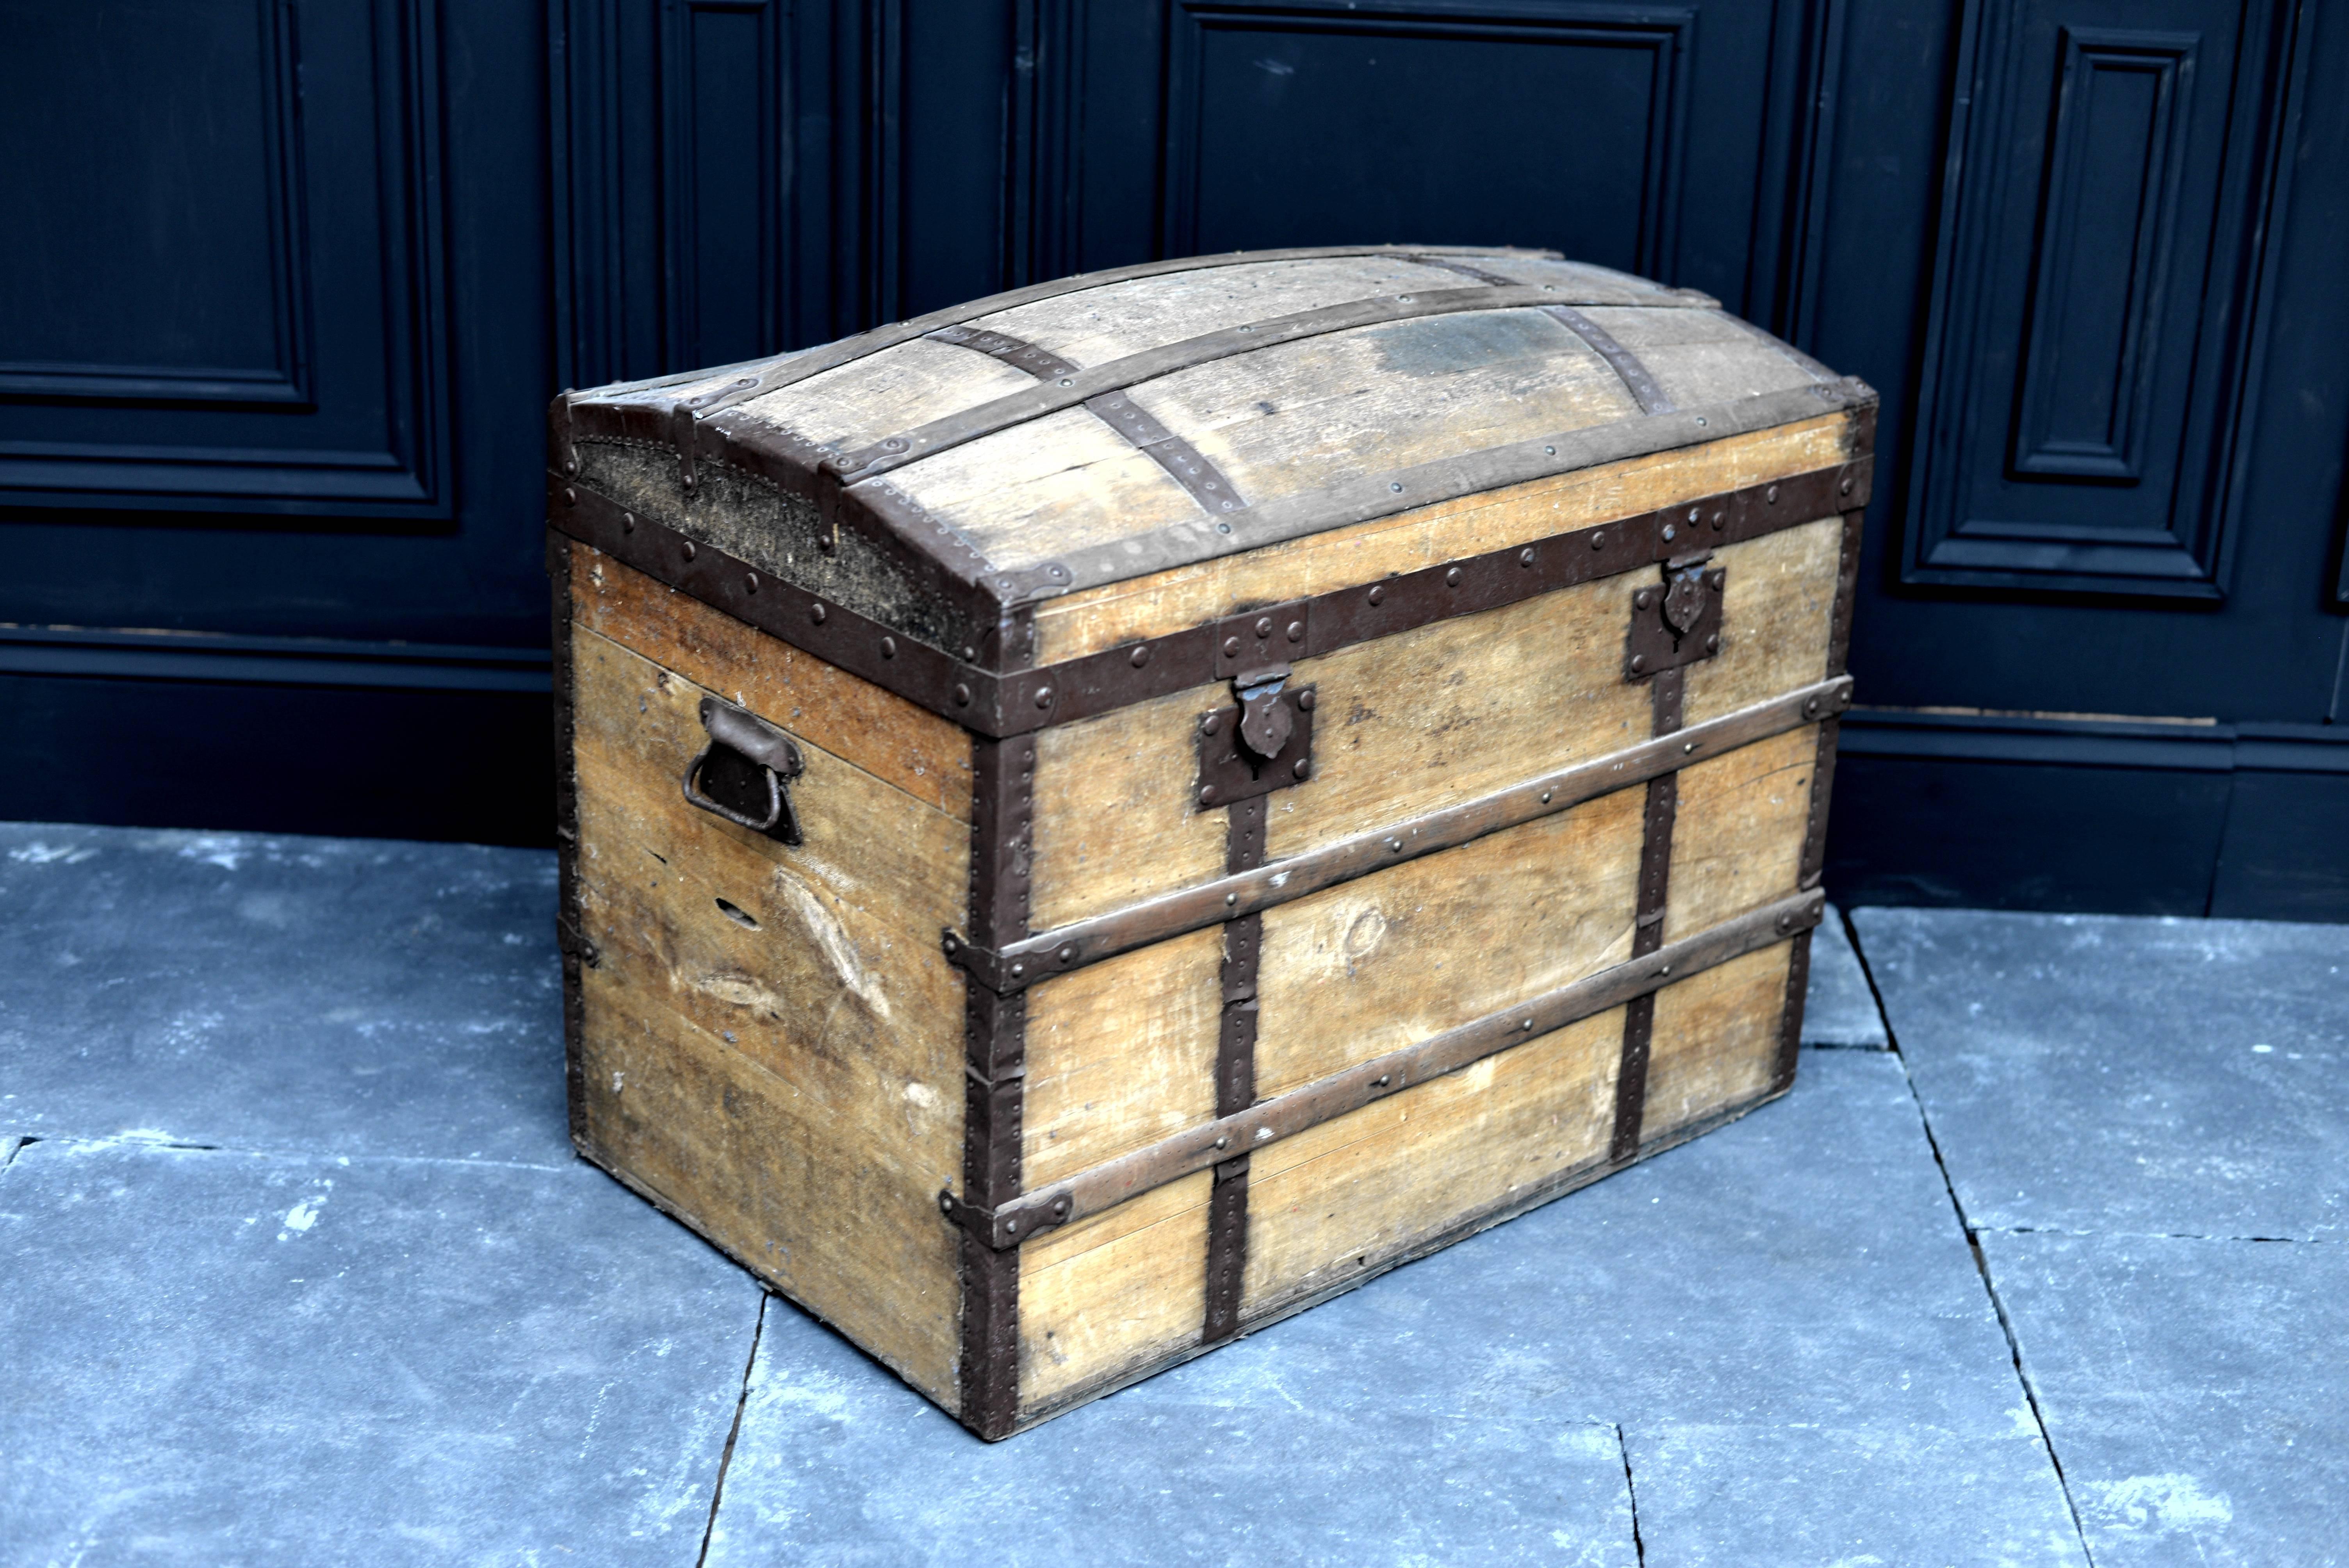 1960s travelling chest or trunk.